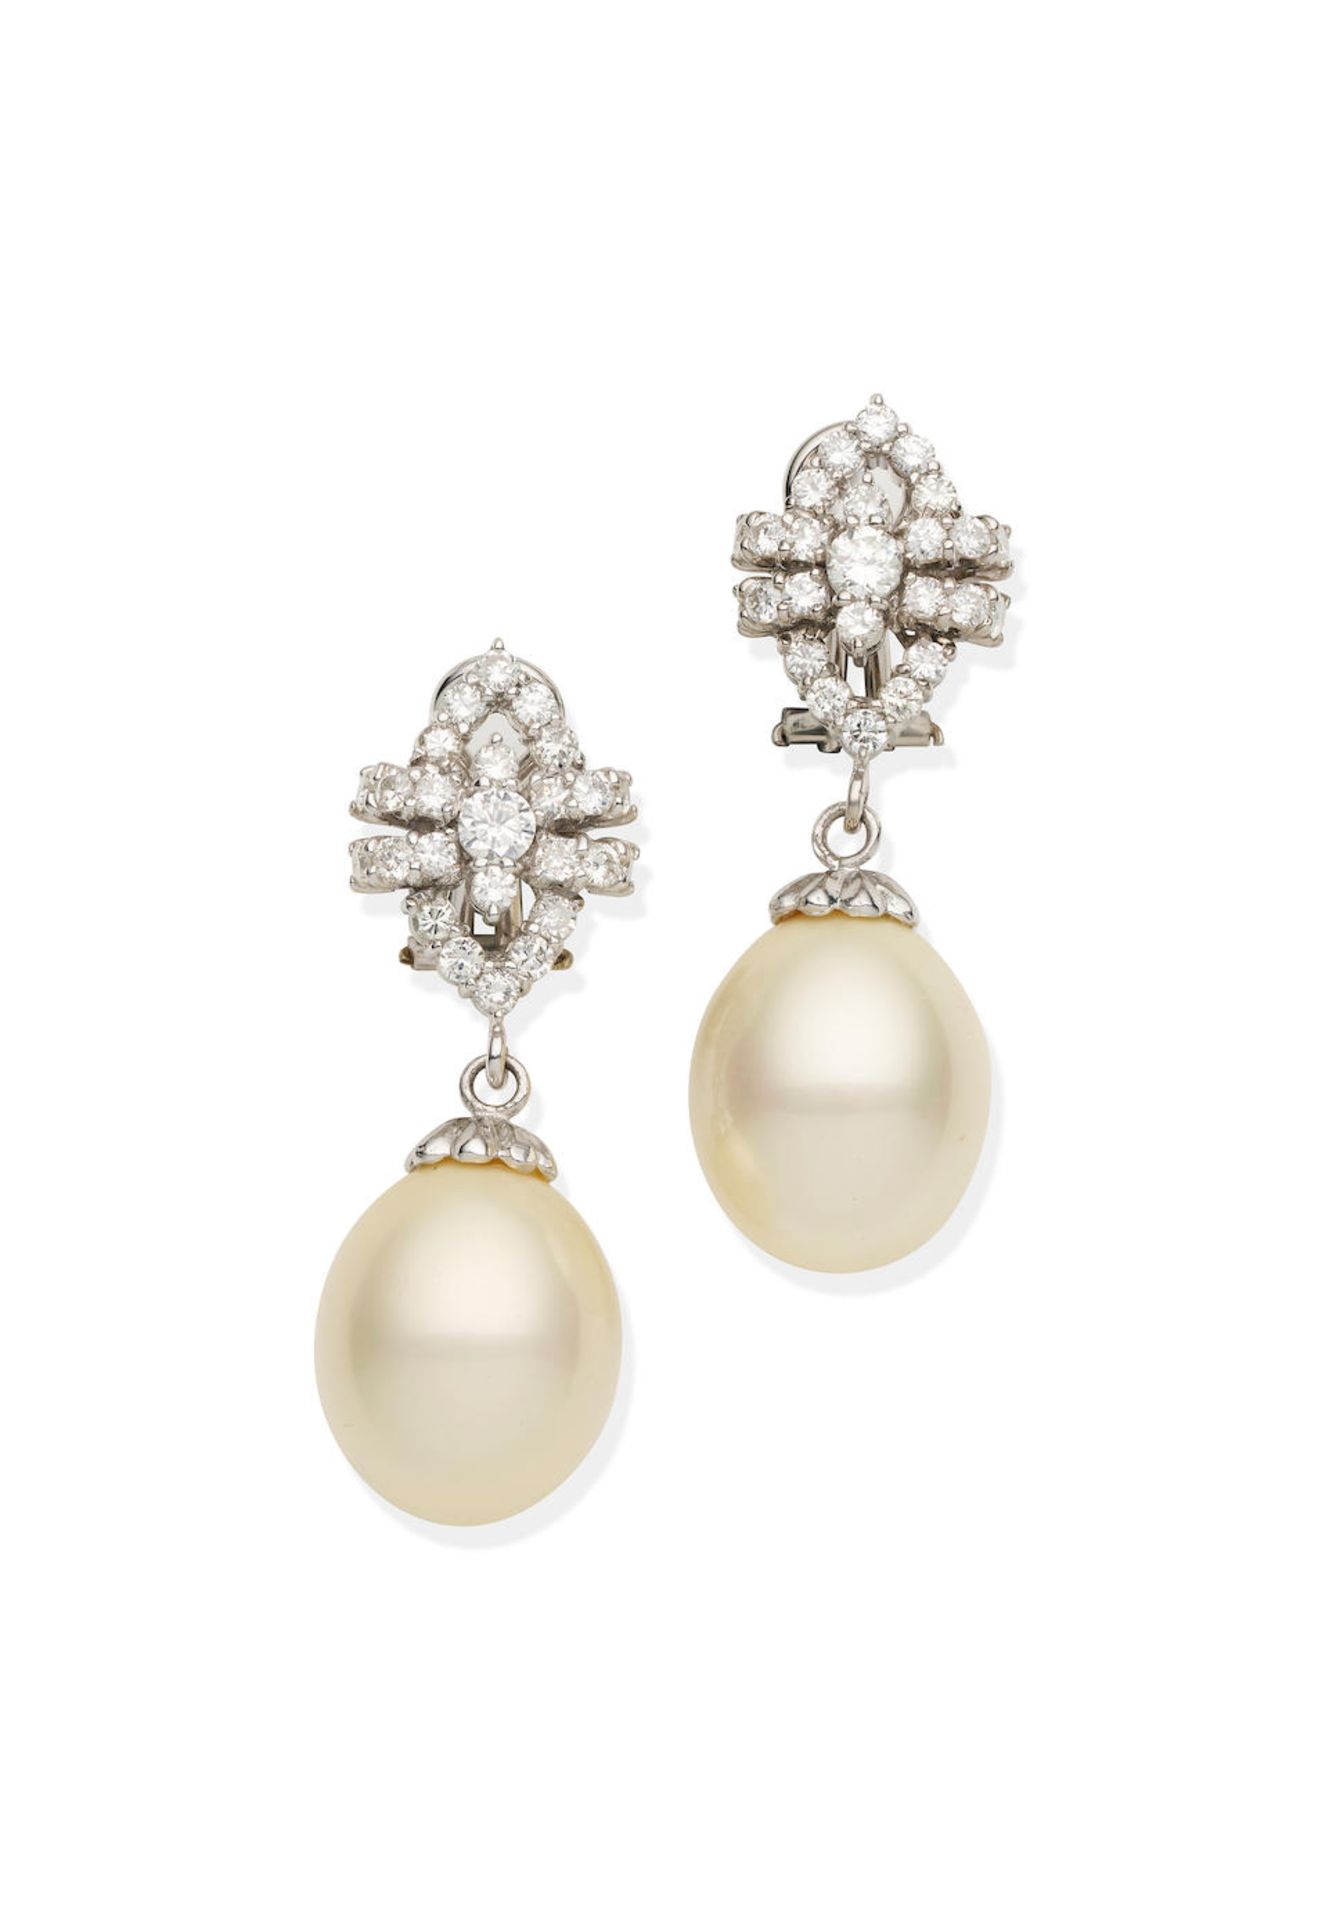 PAIR OF DIAMOND AND SIMULATED PEARL PENDENT EARCLIPS